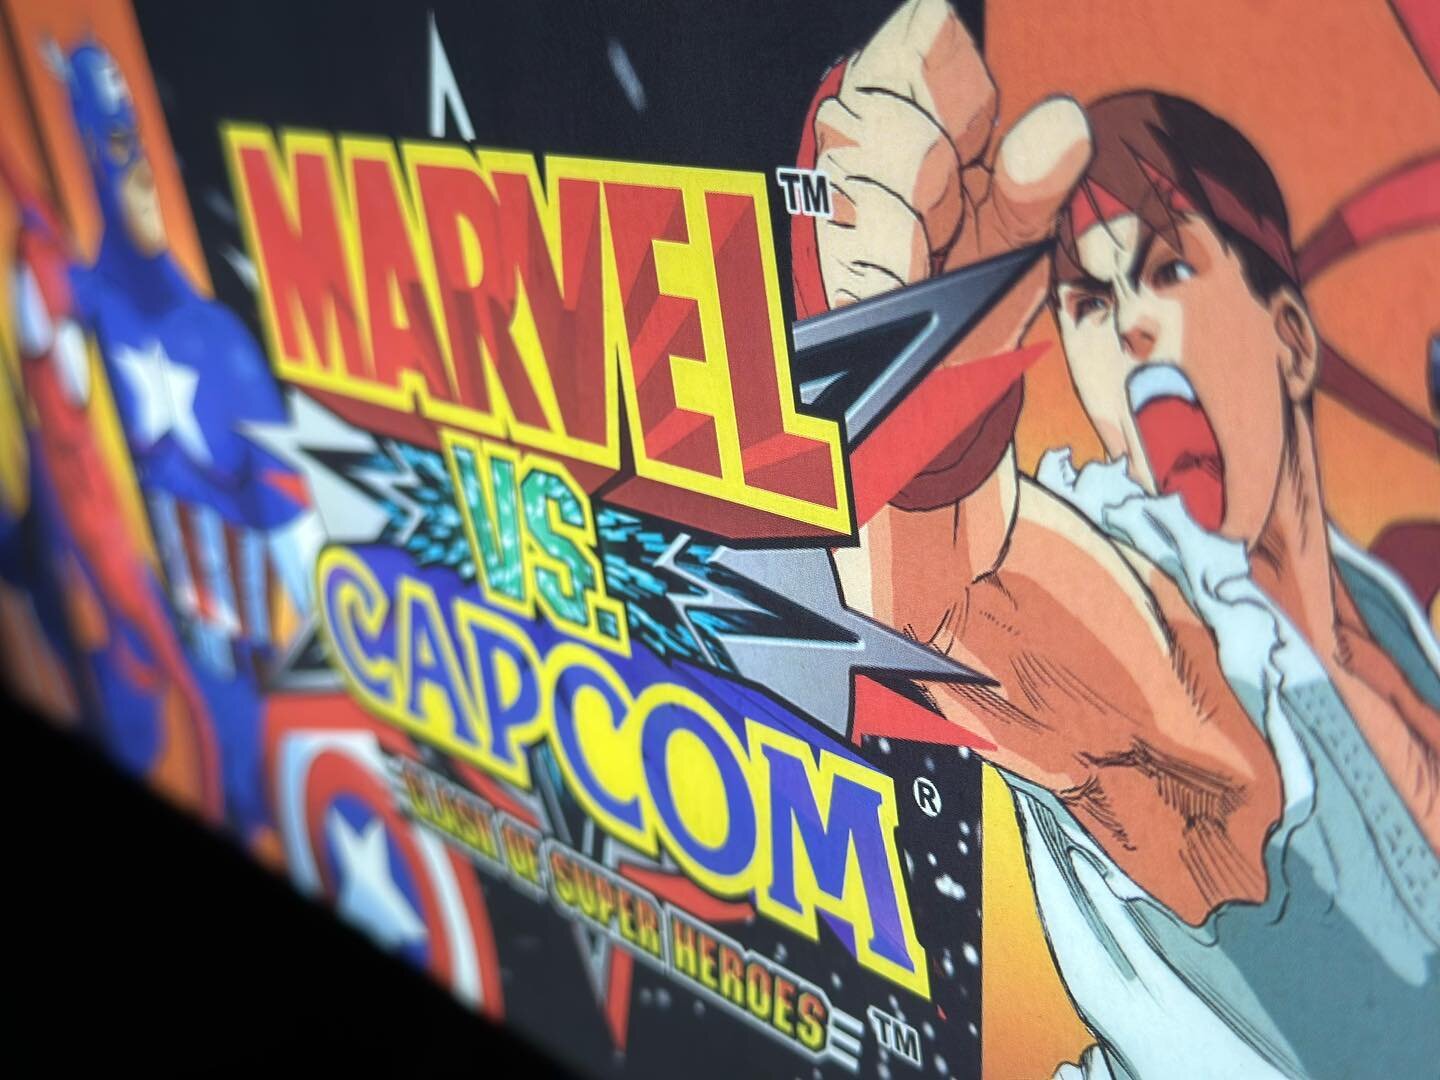 🎮 Exciting News! Joining the family of epic battles and legendary matchups is the NEW Marvel vs. Capcom game! 💥 Get ready for action-packed crossovers like never before. #MarvelVsCapcomFamily #GamingUnite #NewAddition #gameroomrentals #weddingarcad